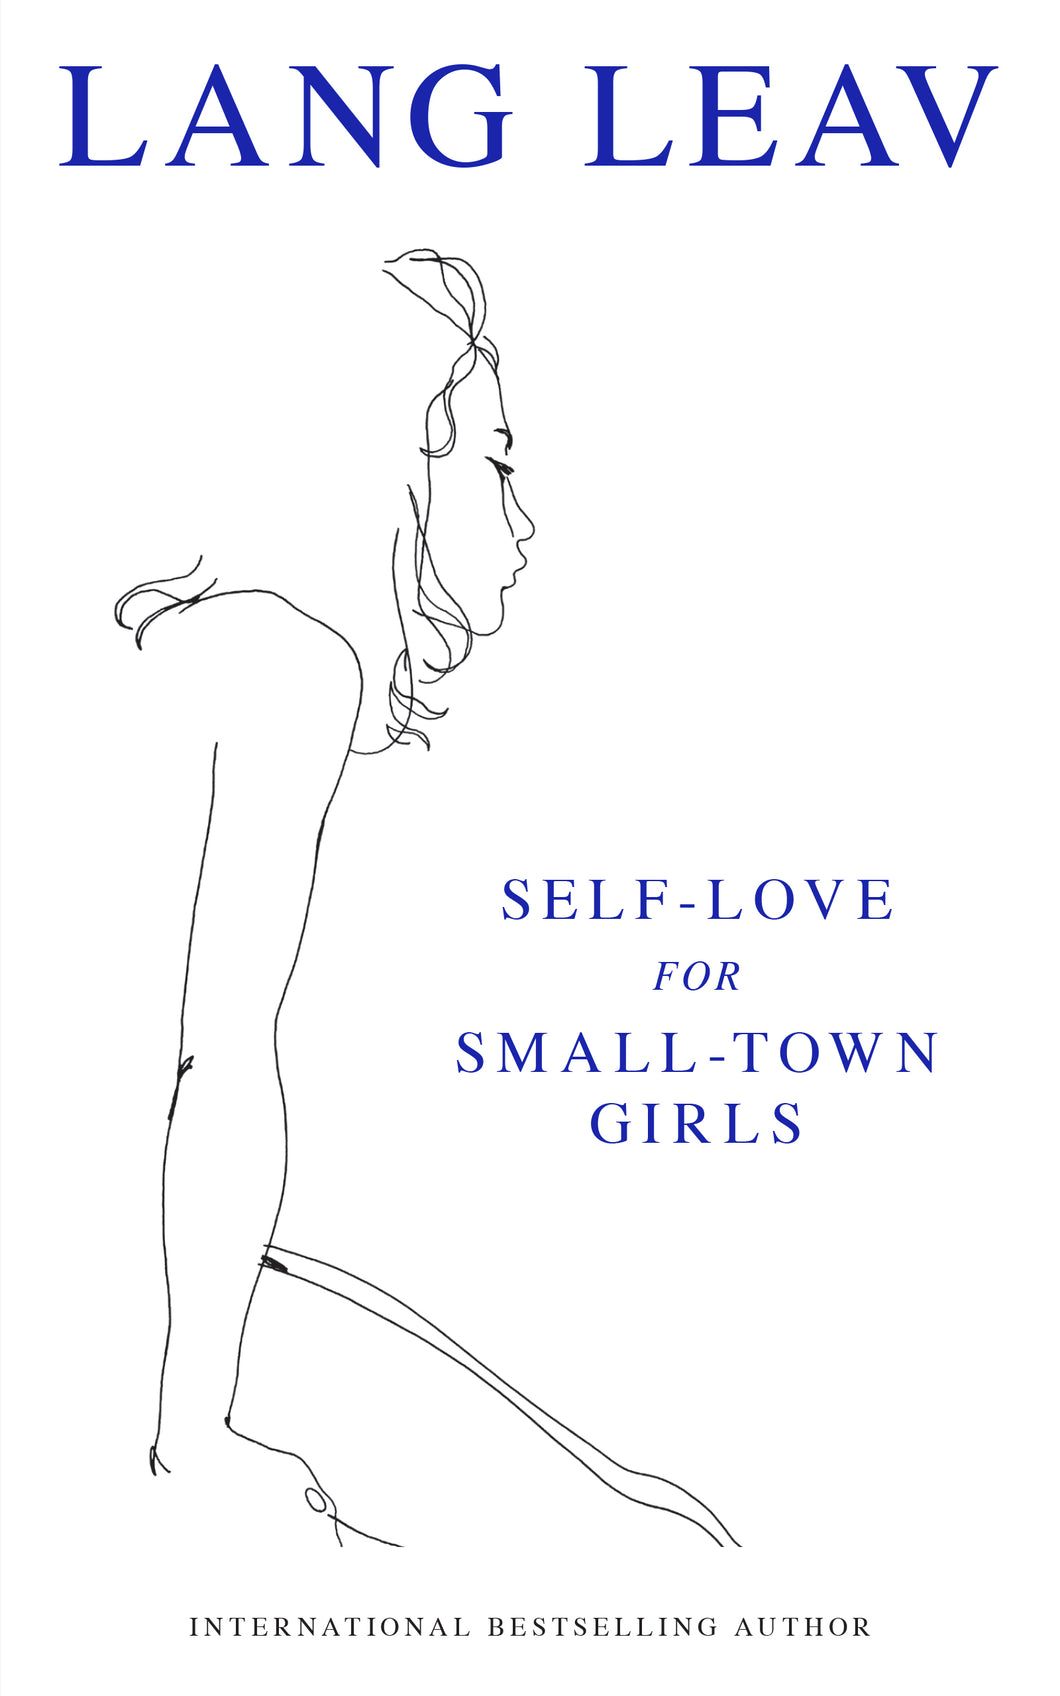 Self-love for Small-town Girls by Lang Leav